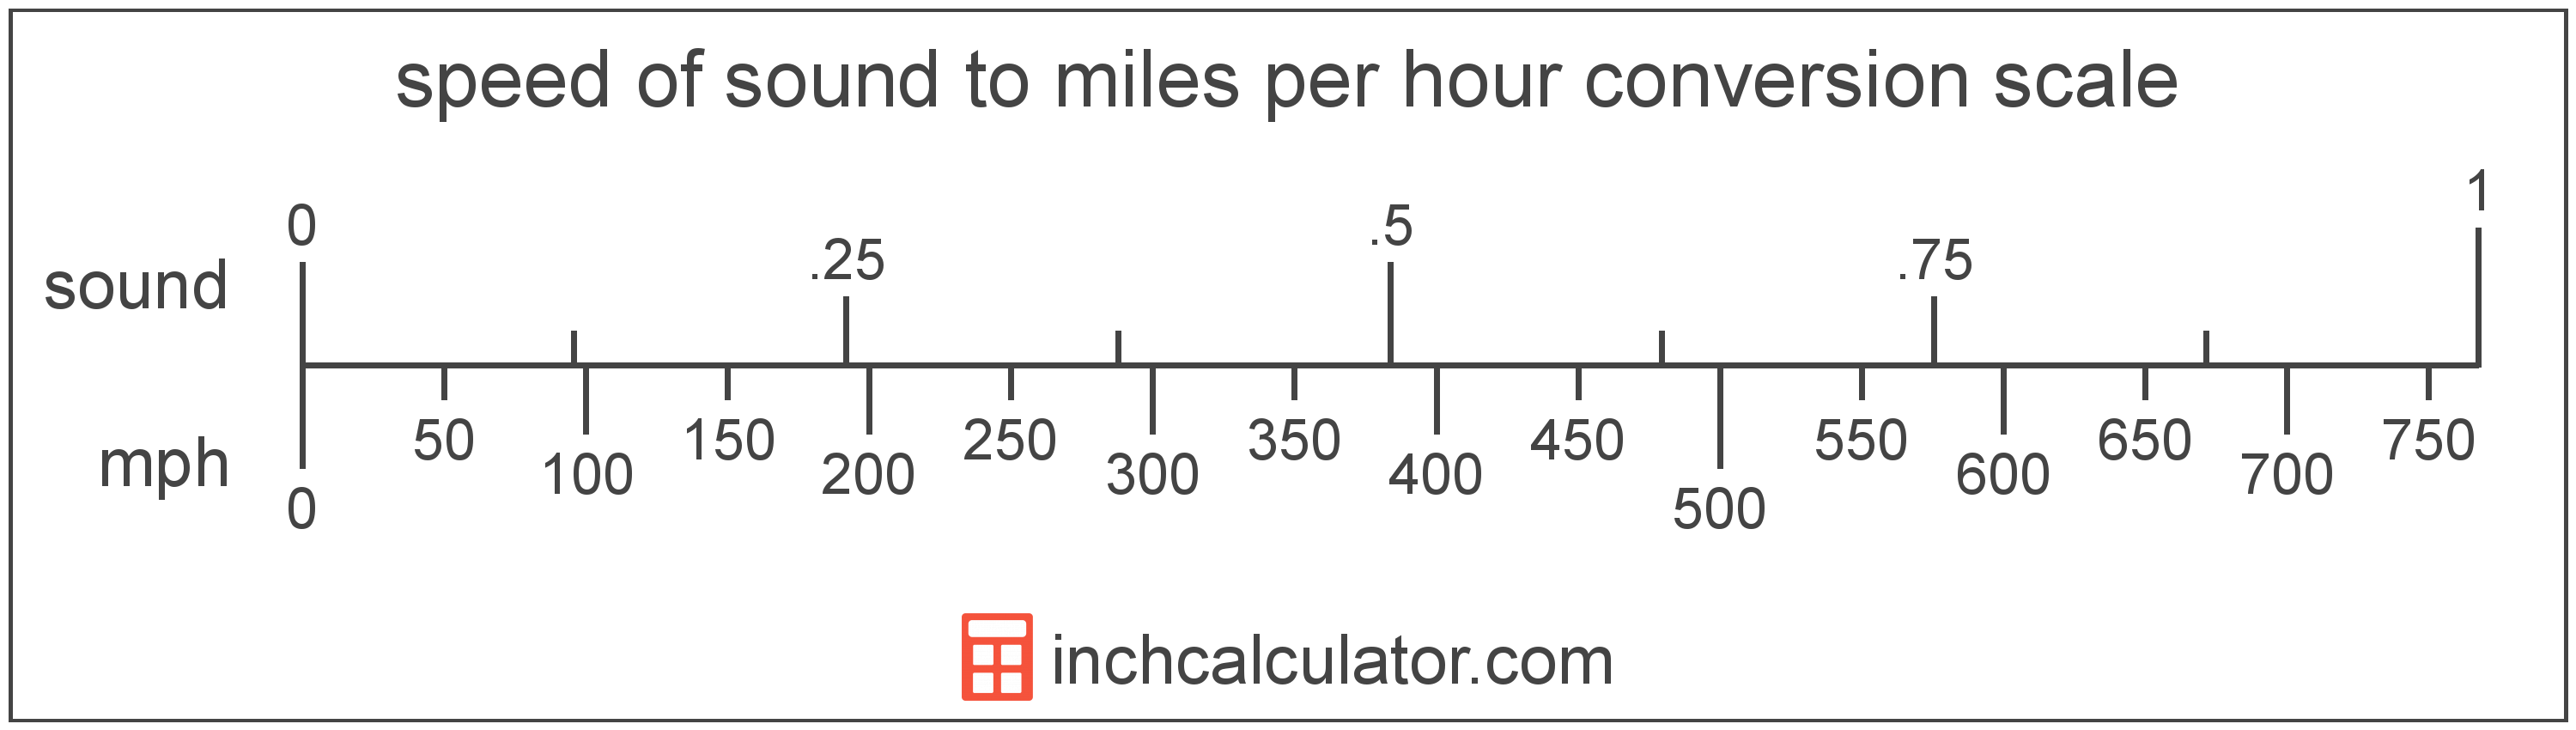 conversion scale showing miles per hour and equivalent speed of sound speed values